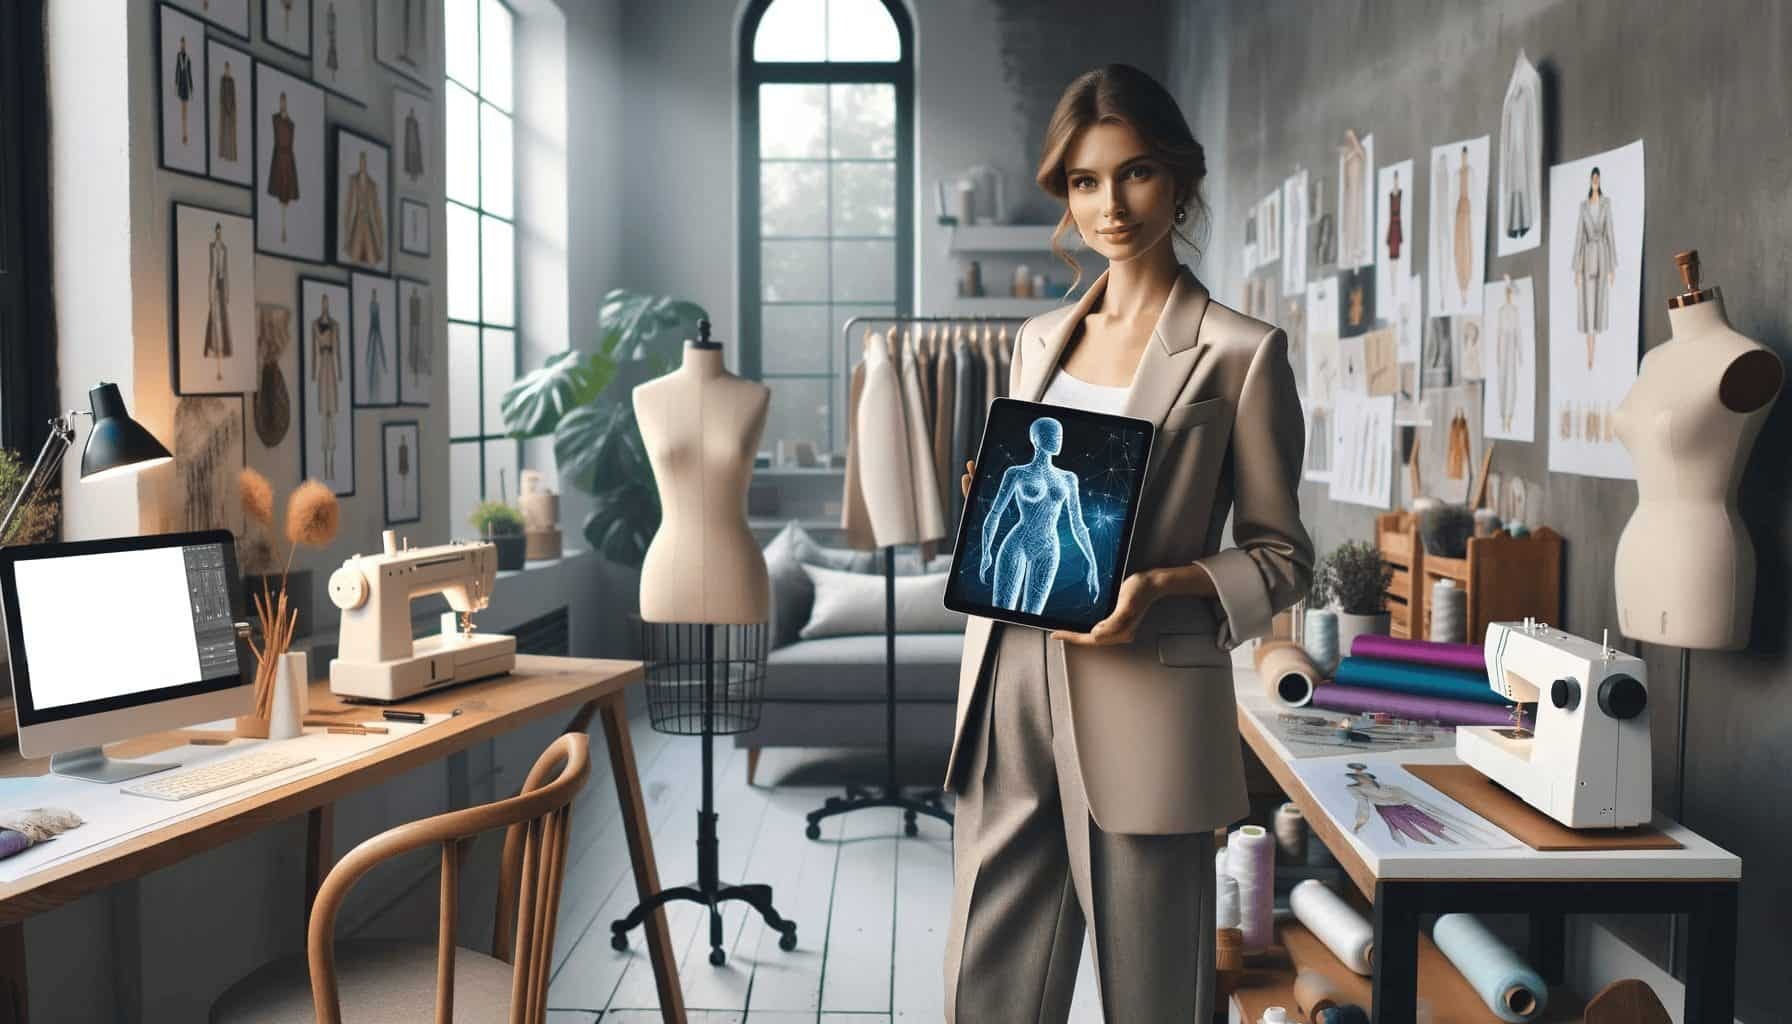 A woman in a suit is holding a tablet in her office, showcasing digital transformation in the fashion retail industry.